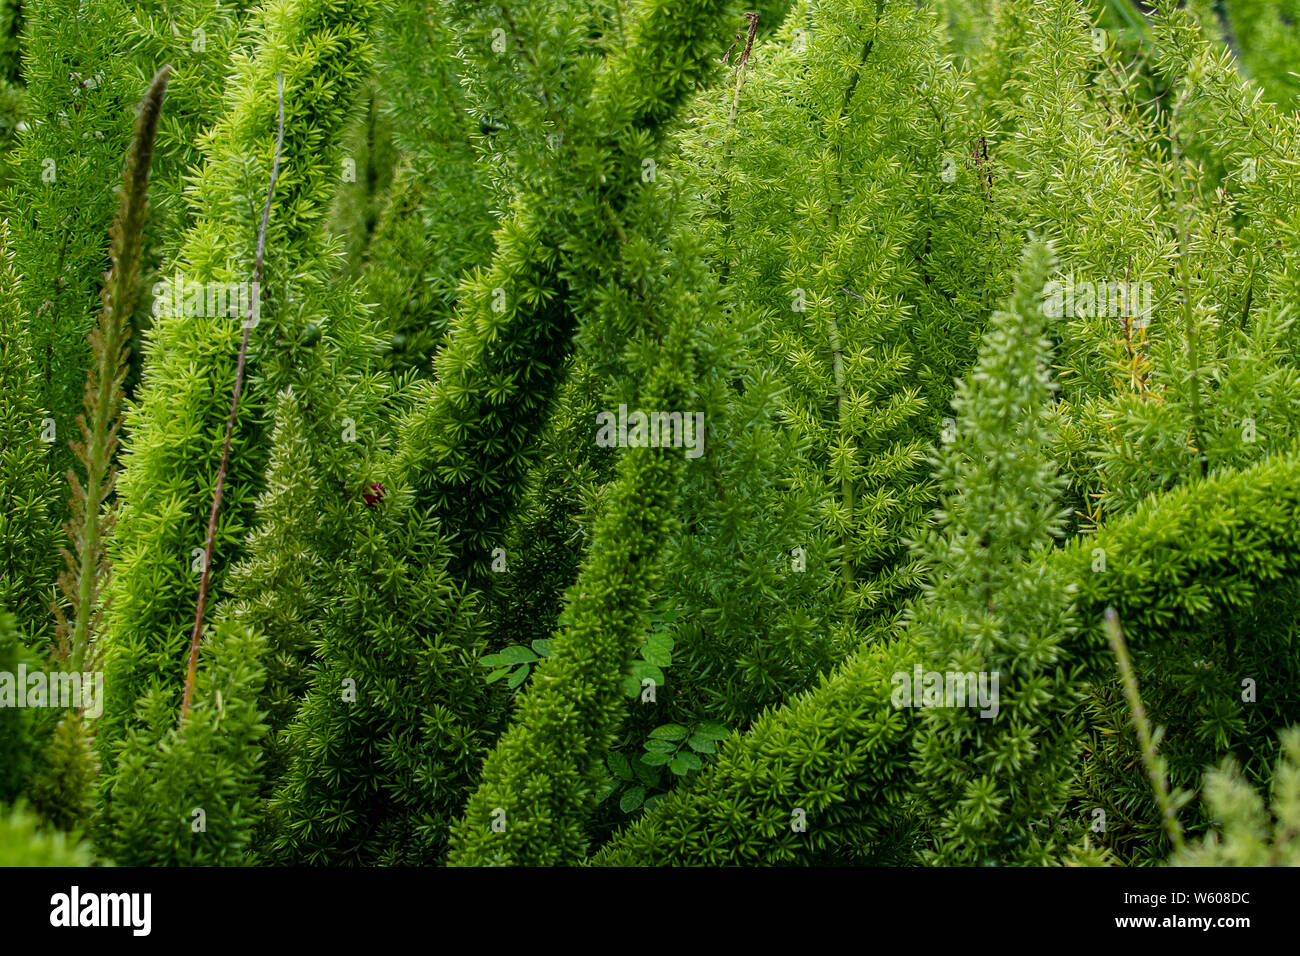 Tall green spiky plants are beautiful in the garden in Florida Stock Photo